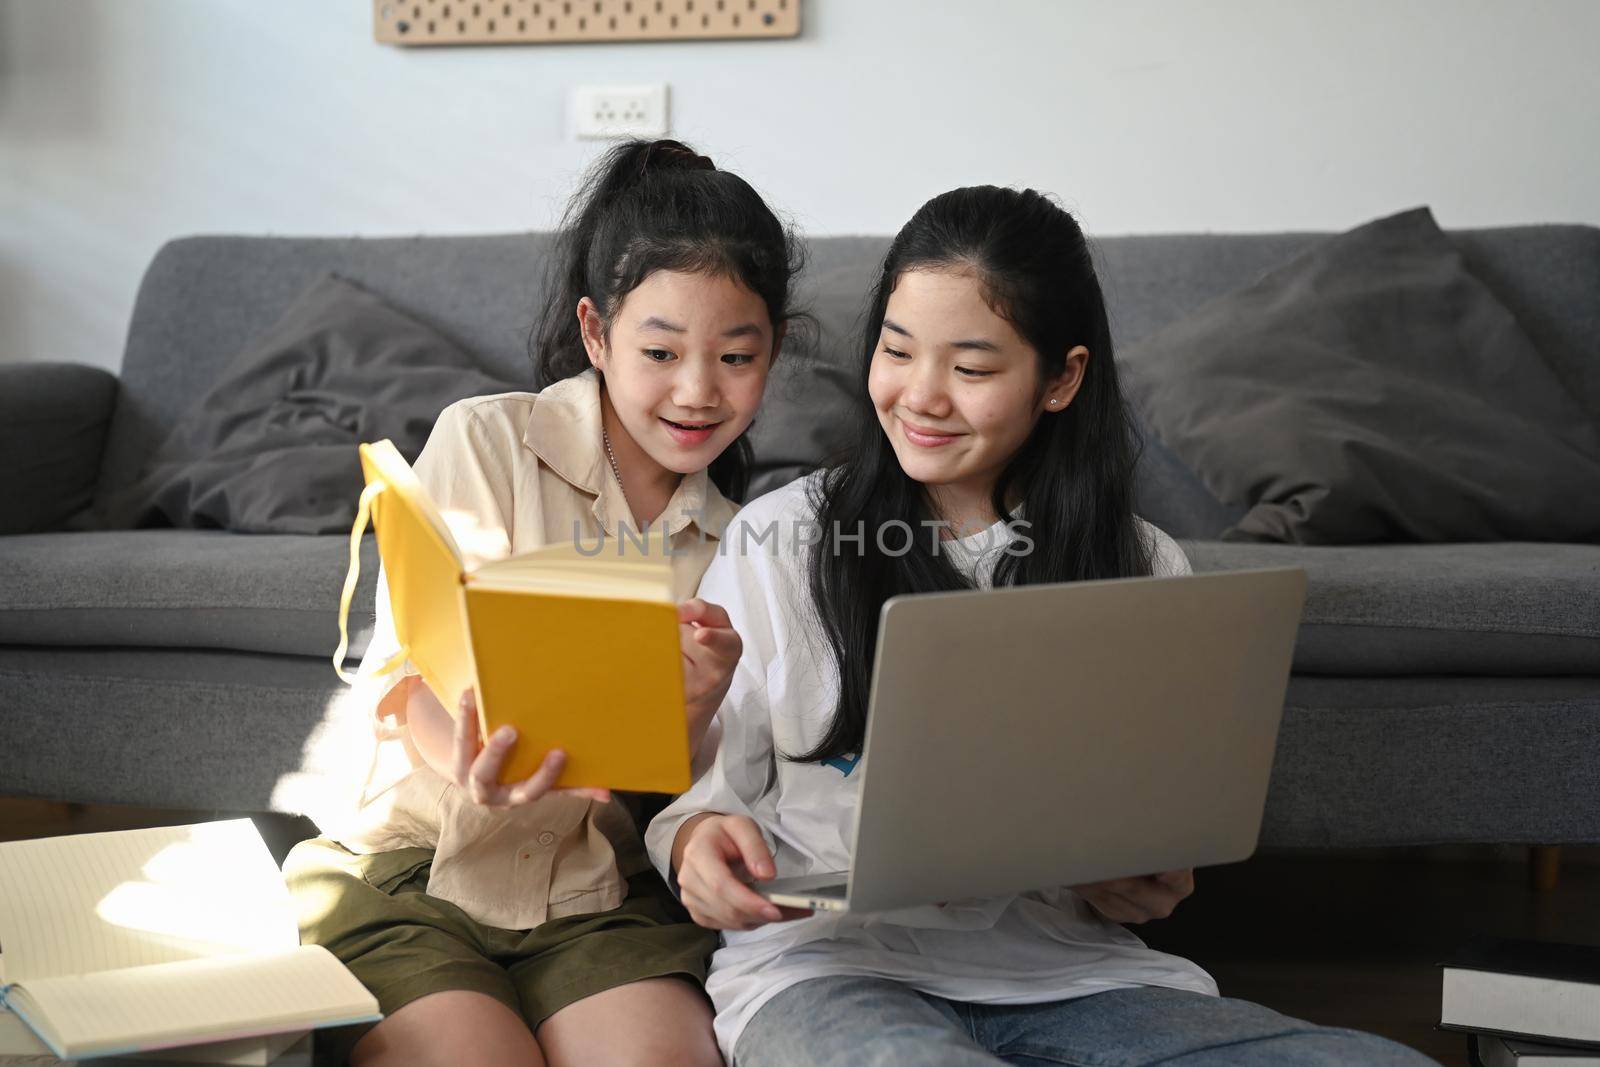 Smiling asian girl using laptop and her younger sister reading book while sitting together in living room. by prathanchorruangsak